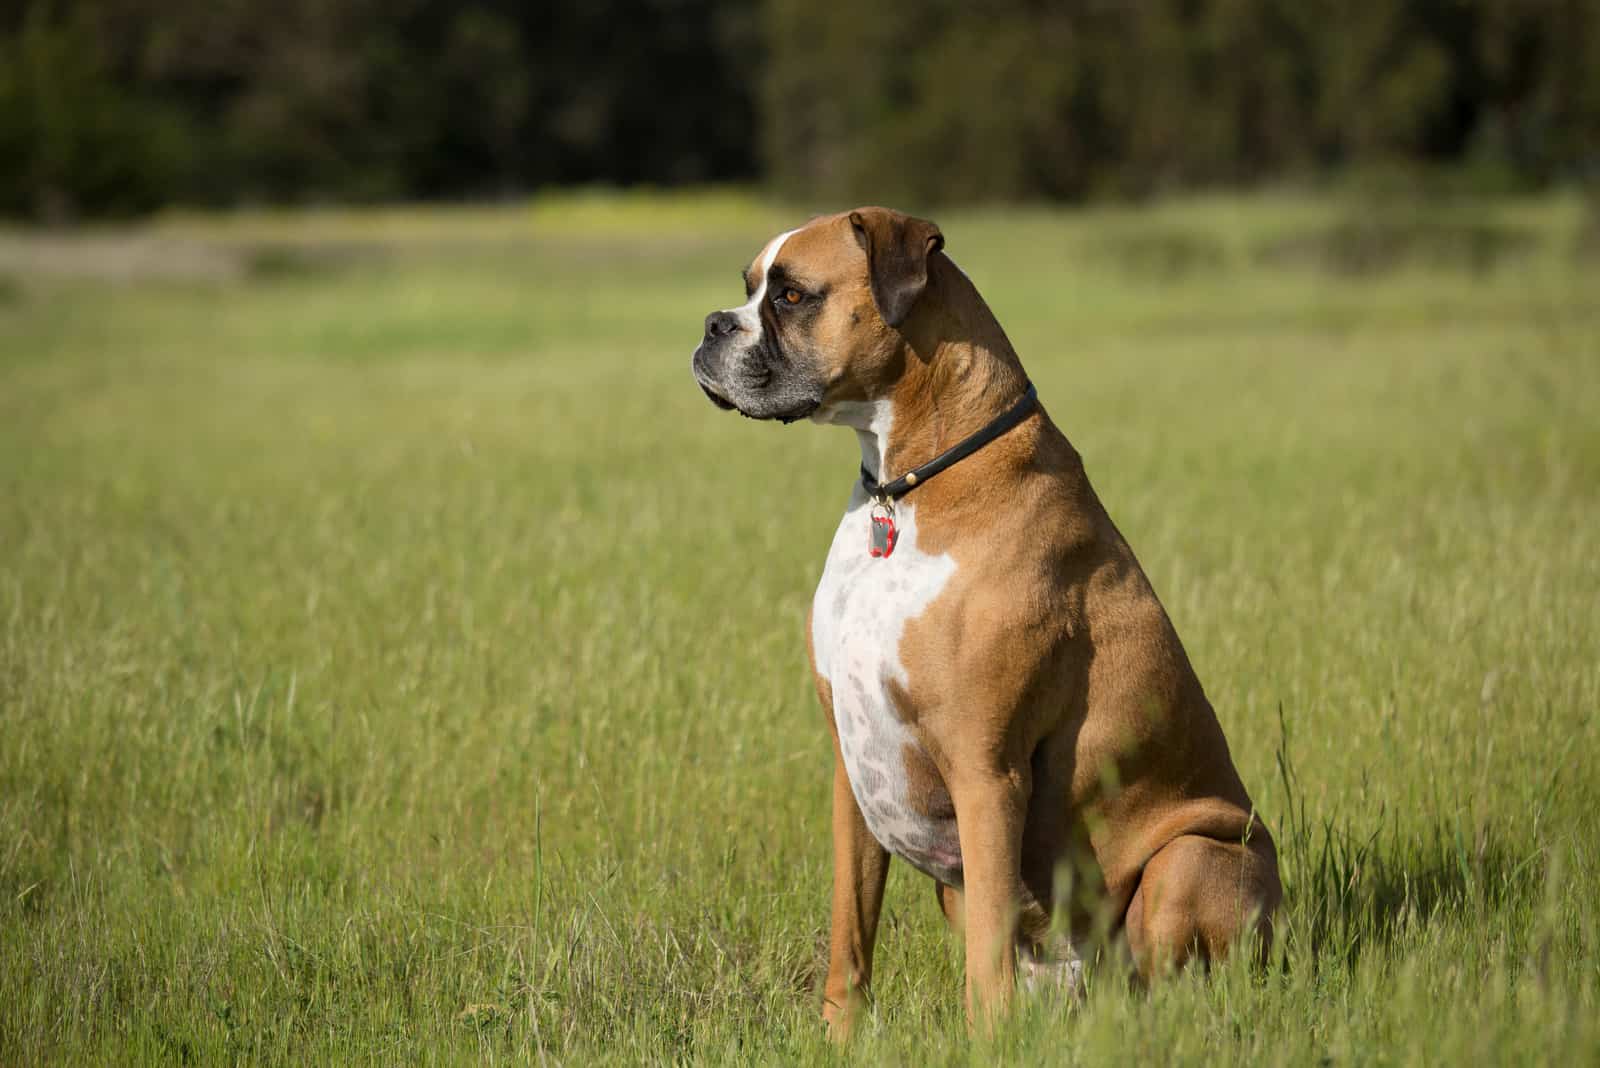 the boxer is sitting in the grass and looking into the distance